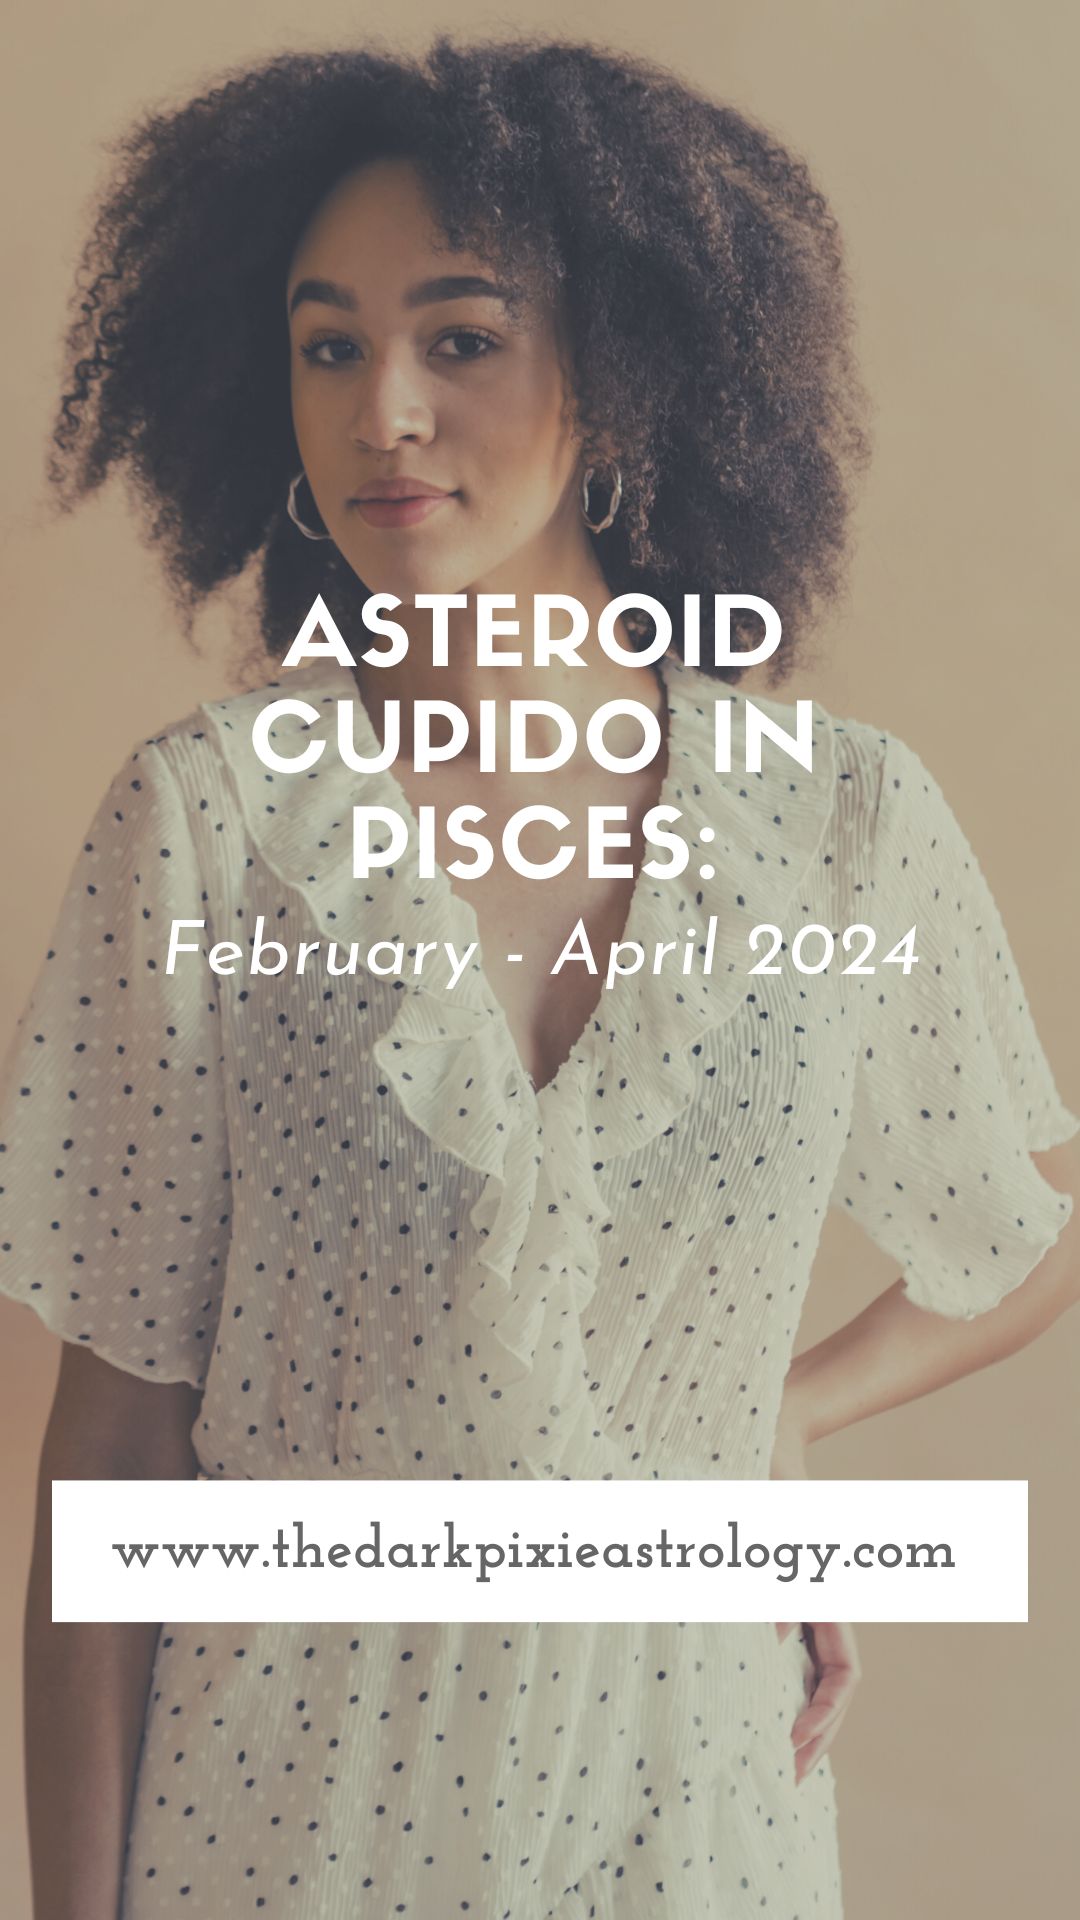 Asteroid Cupido in Pisces: February - April 2024 - The Dark Pixie Astrology